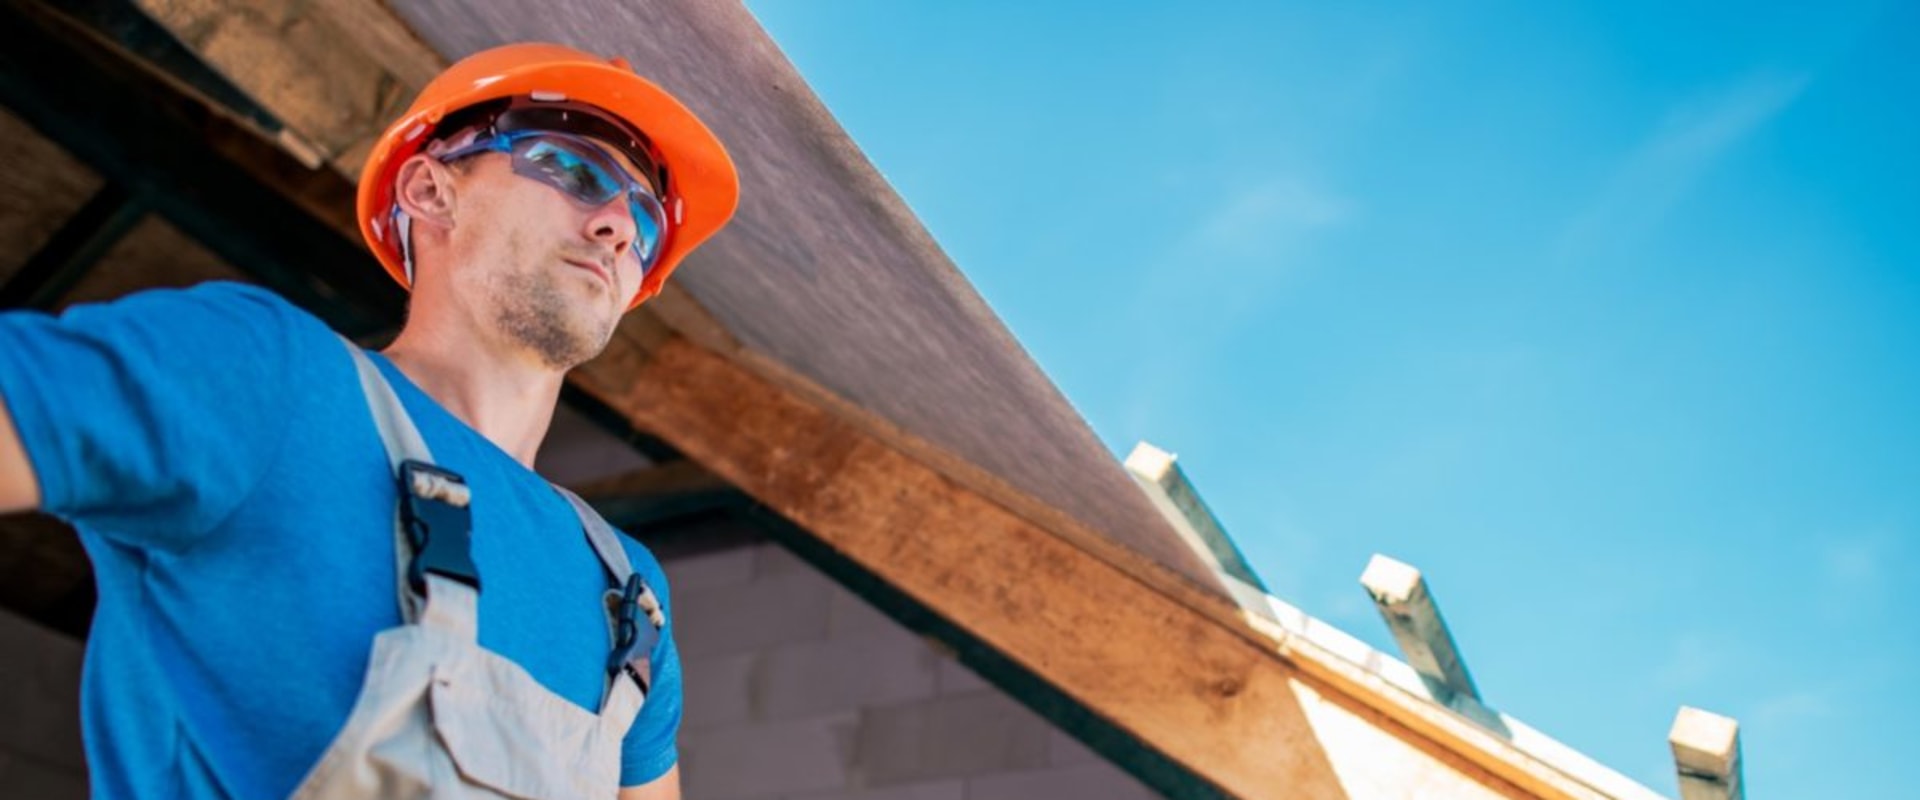 The Pros and Cons of Hiring a Contractor for Residential Construction and Remodeling